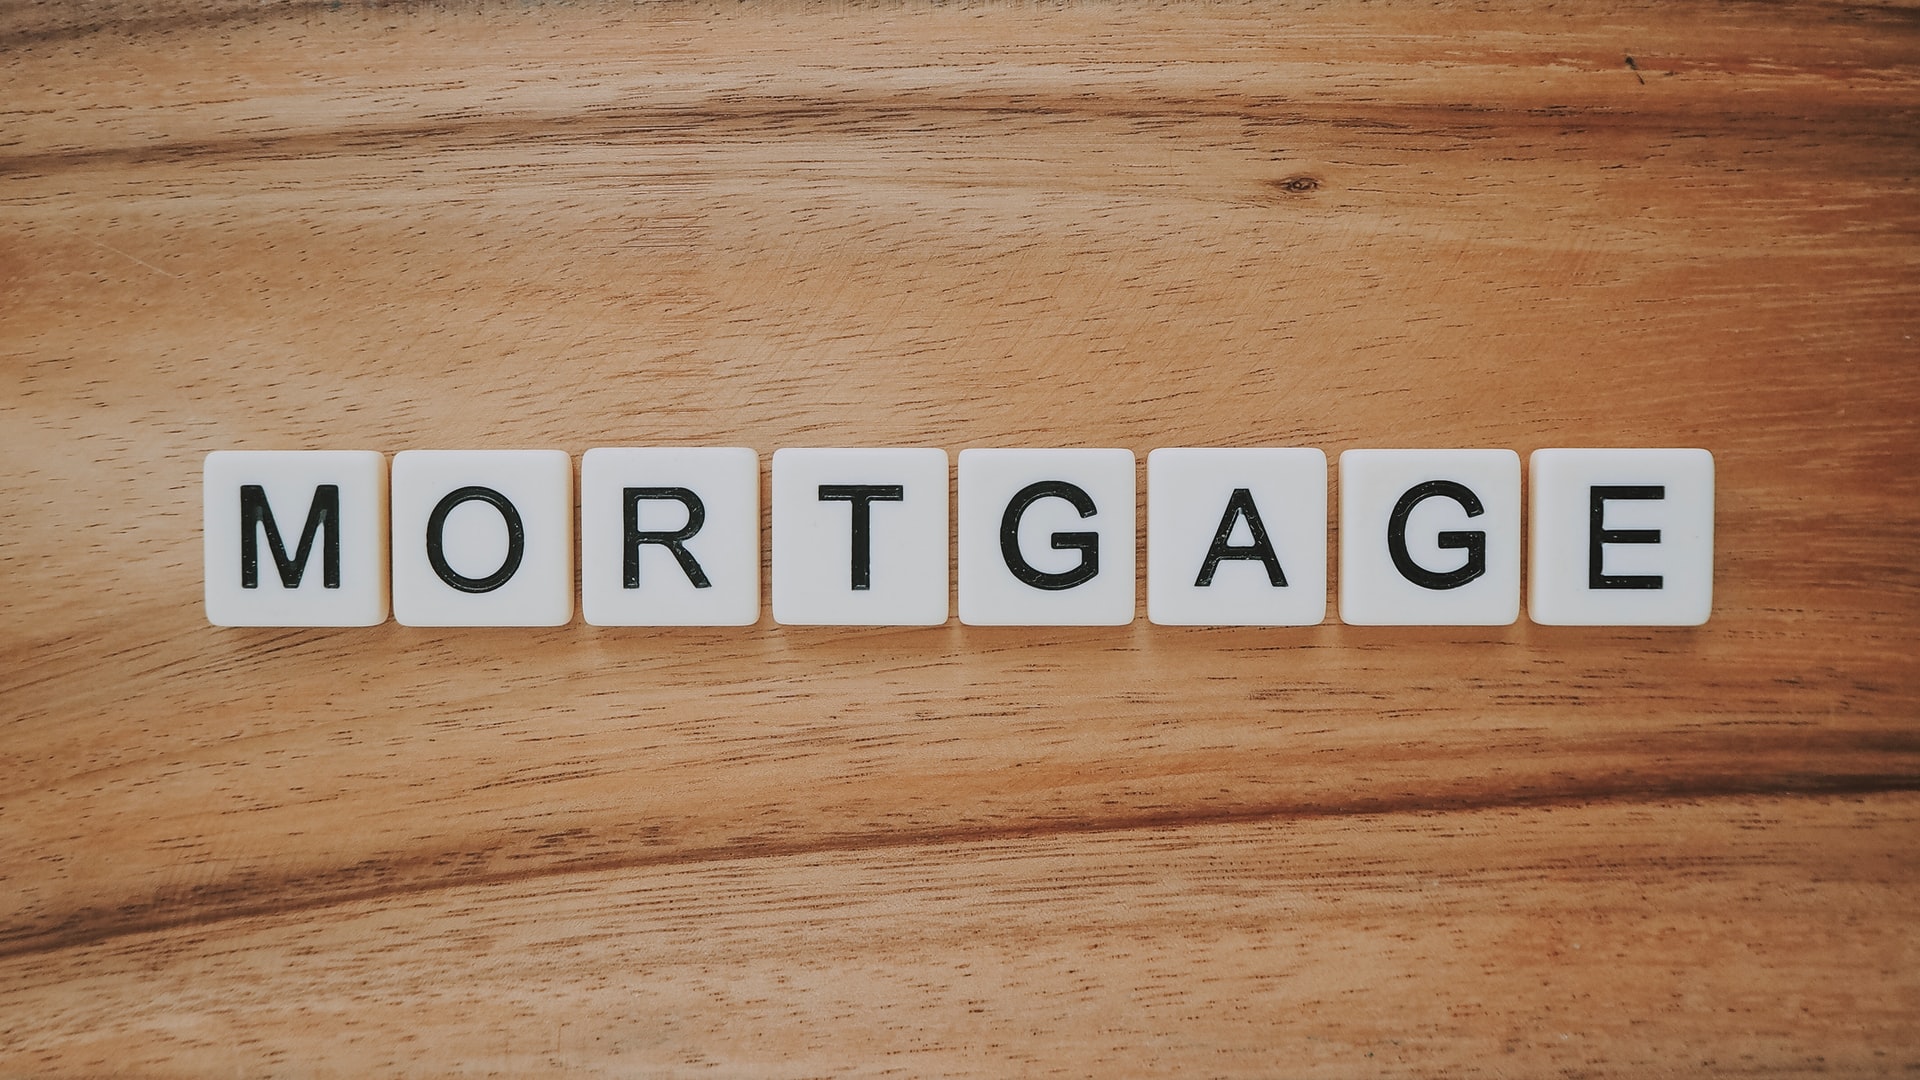 Tiles spelling the word mortgage